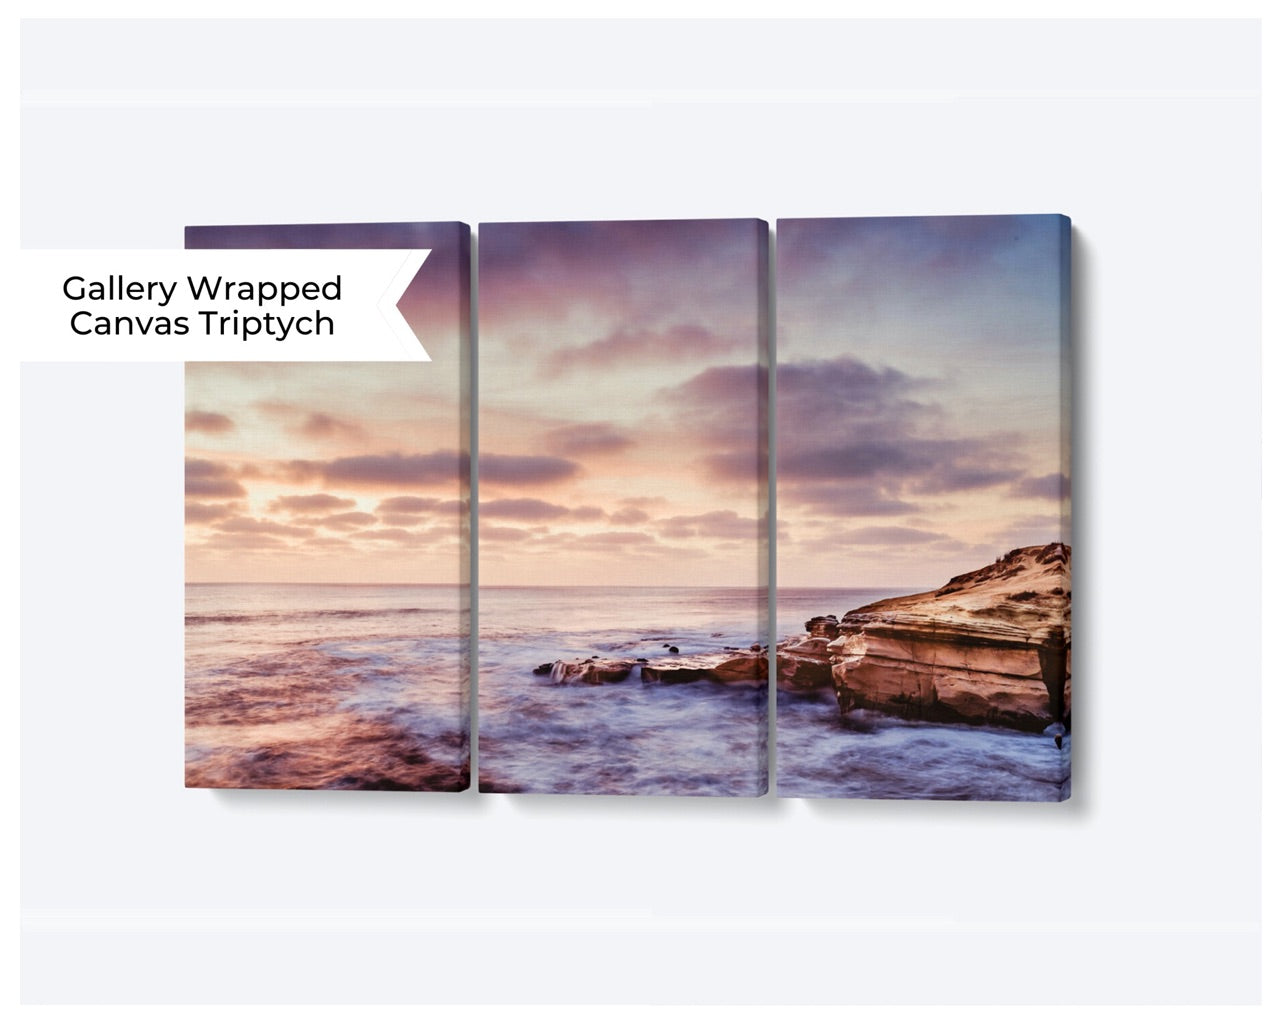 About Triptychs